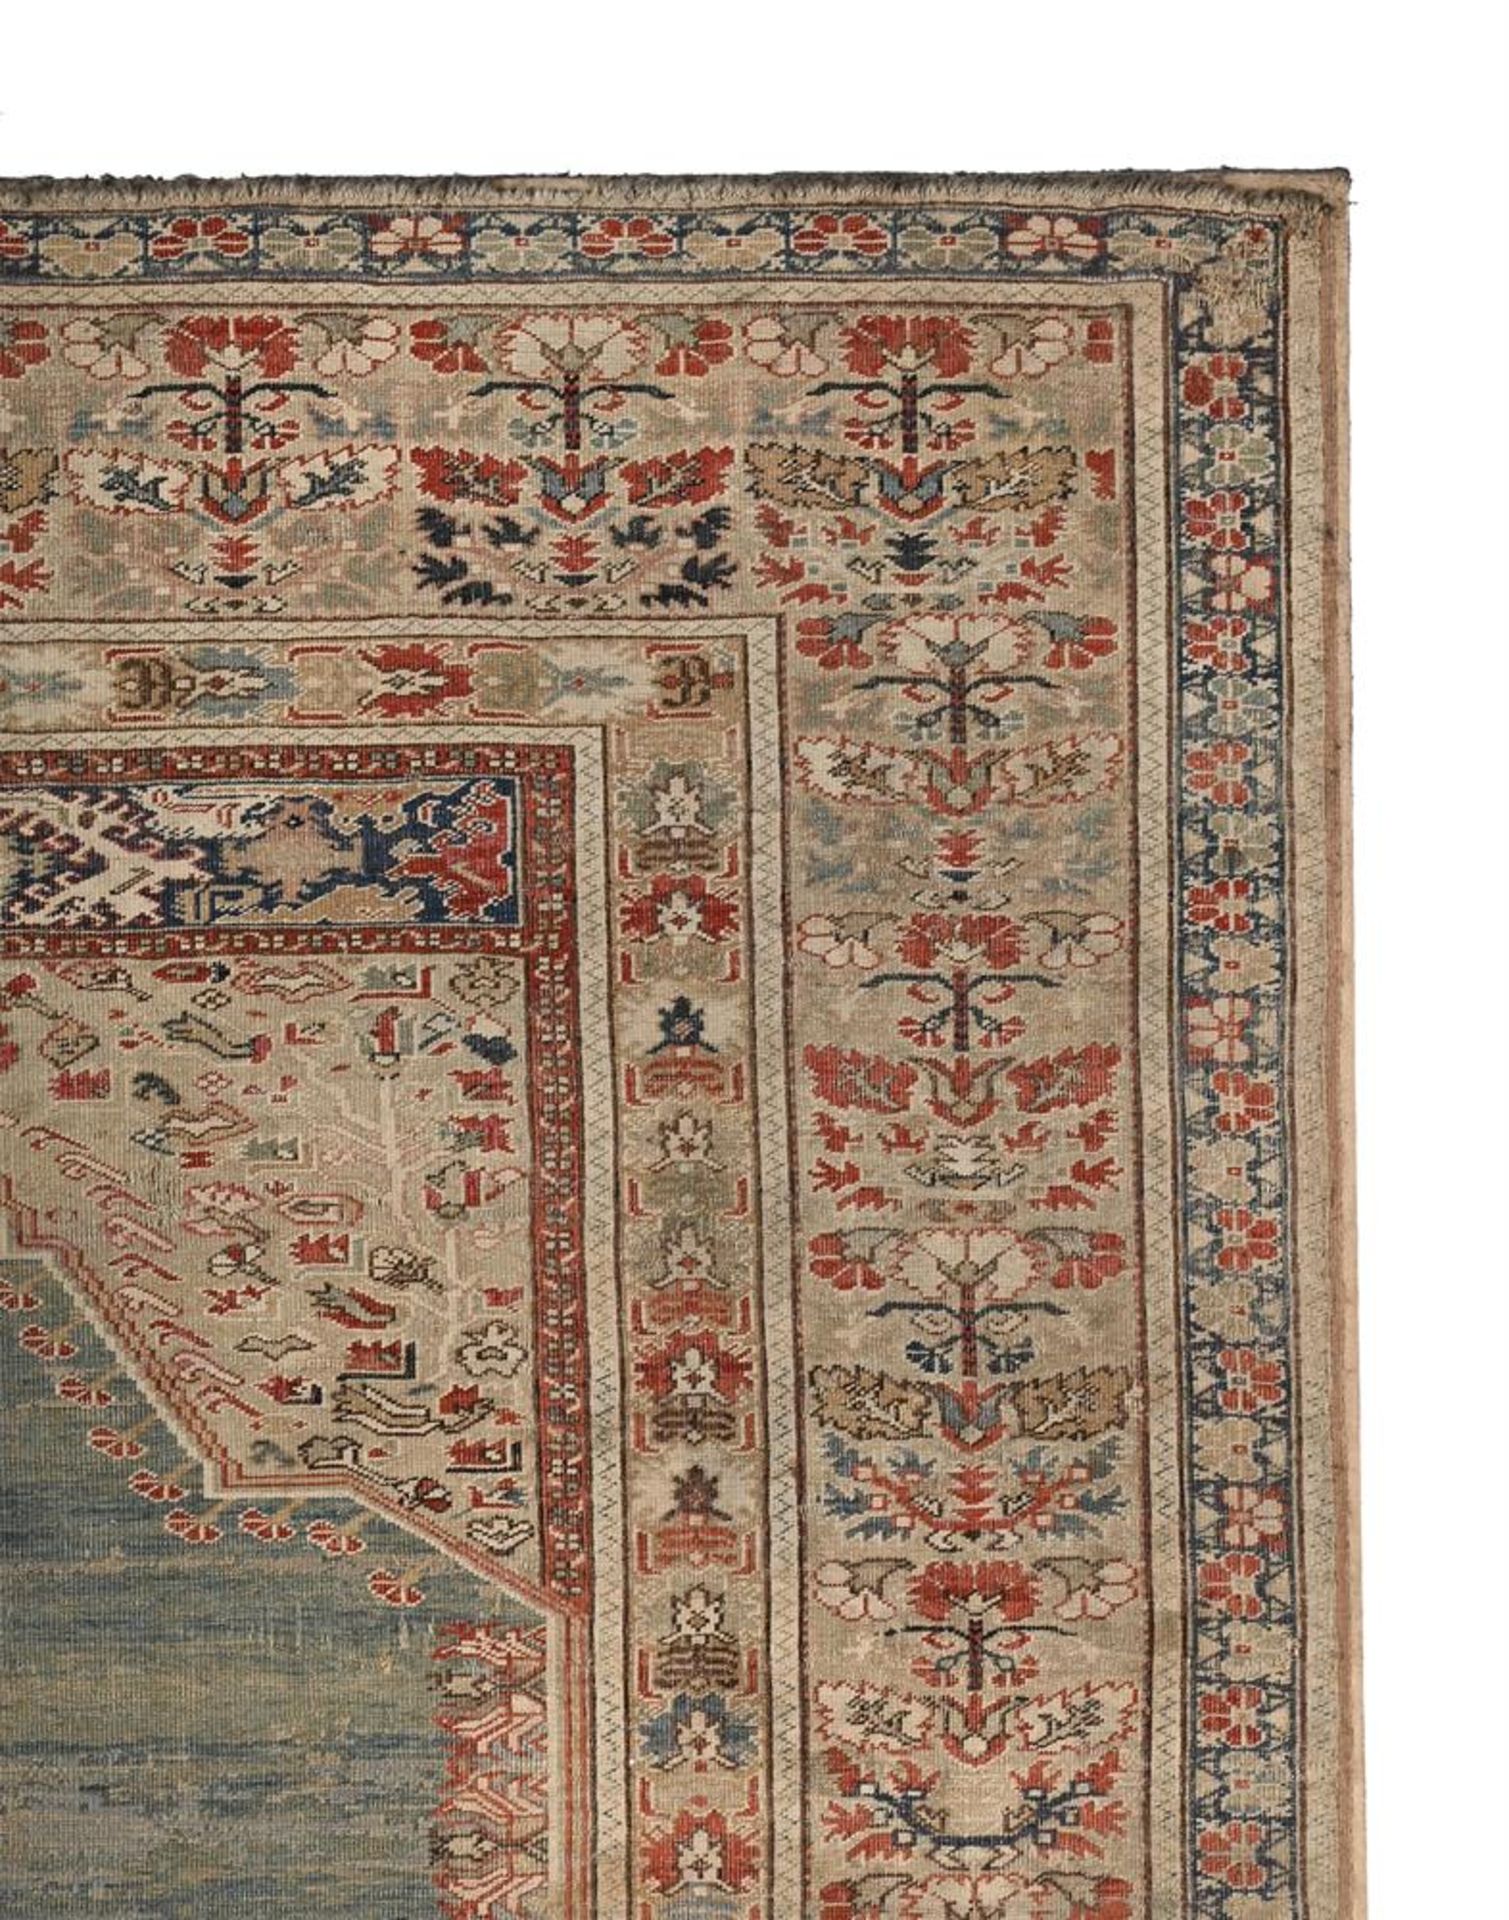 TWO PERSIAN PRAYER RUGS - Image 4 of 4